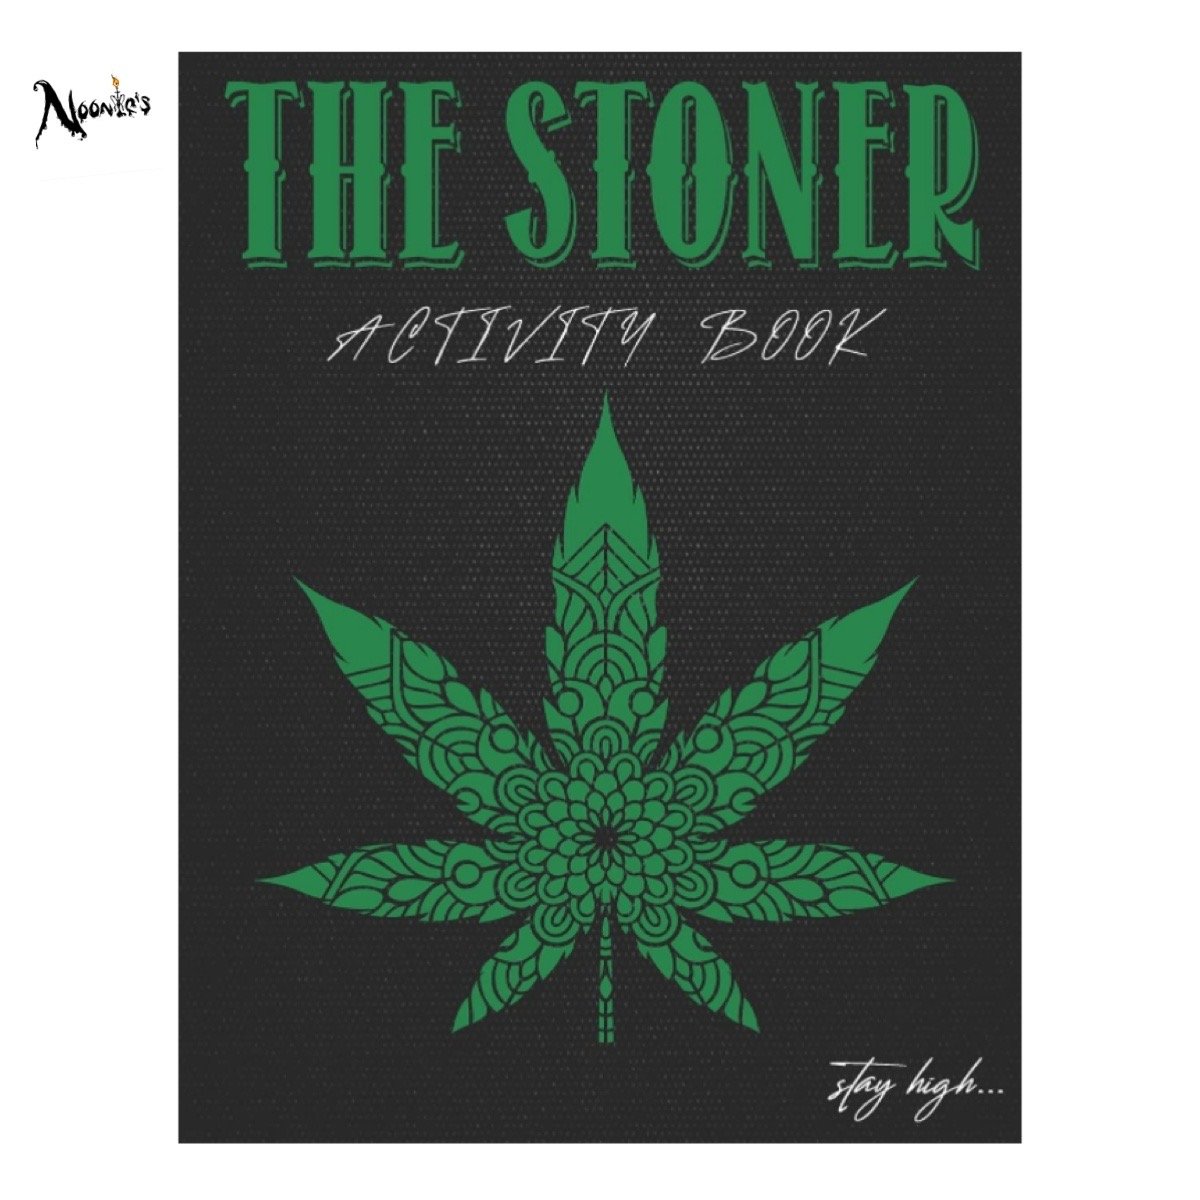 Image of Productive stoner activity book